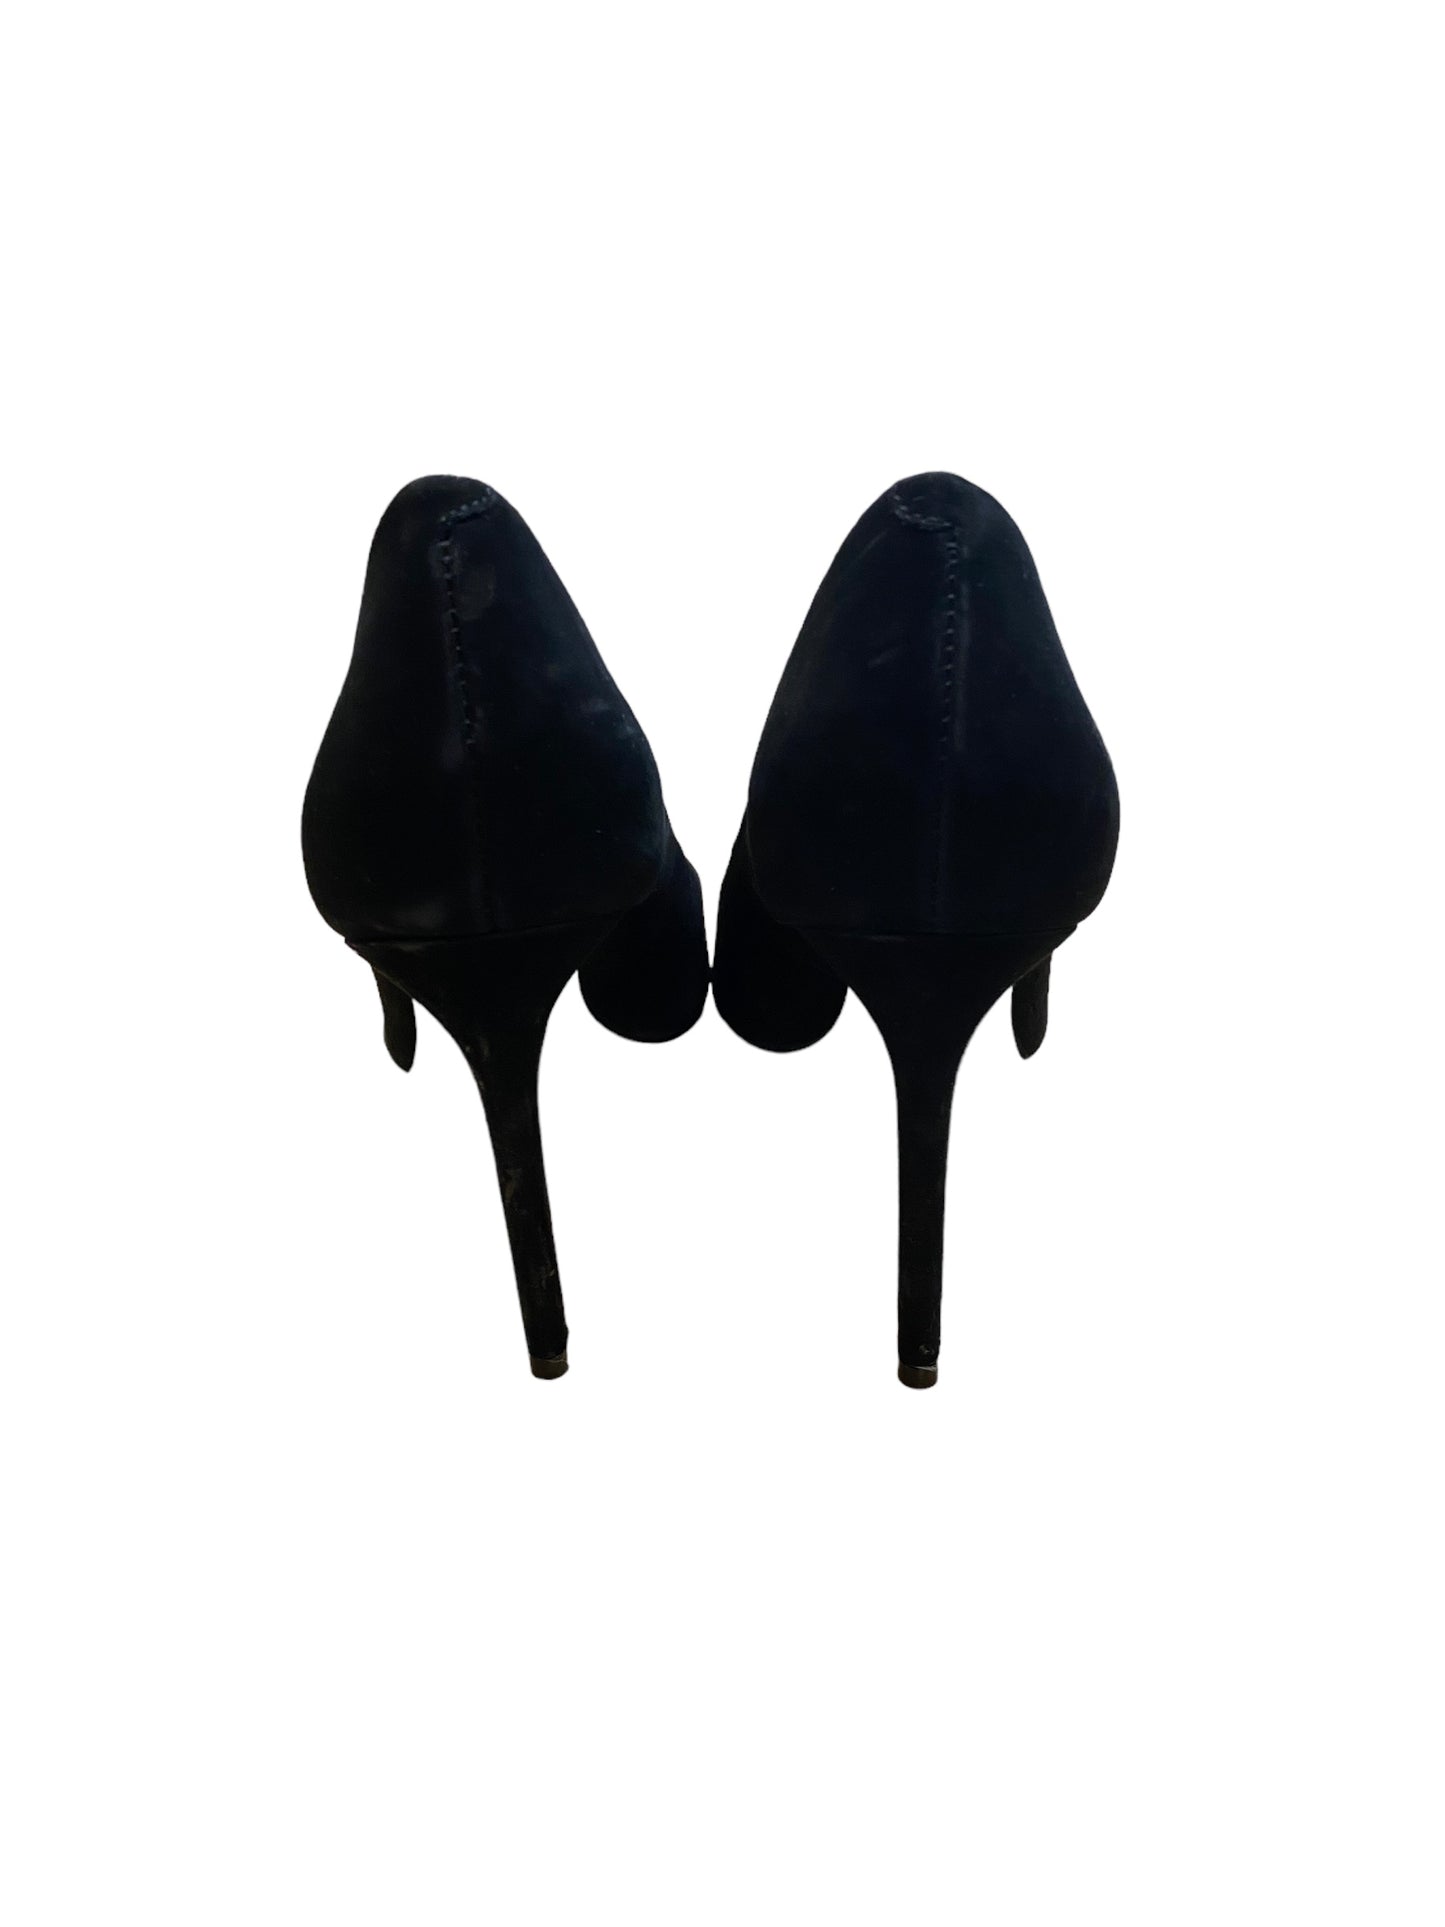 Shoes Heels Stiletto By Clothes Mentor  Size: 9